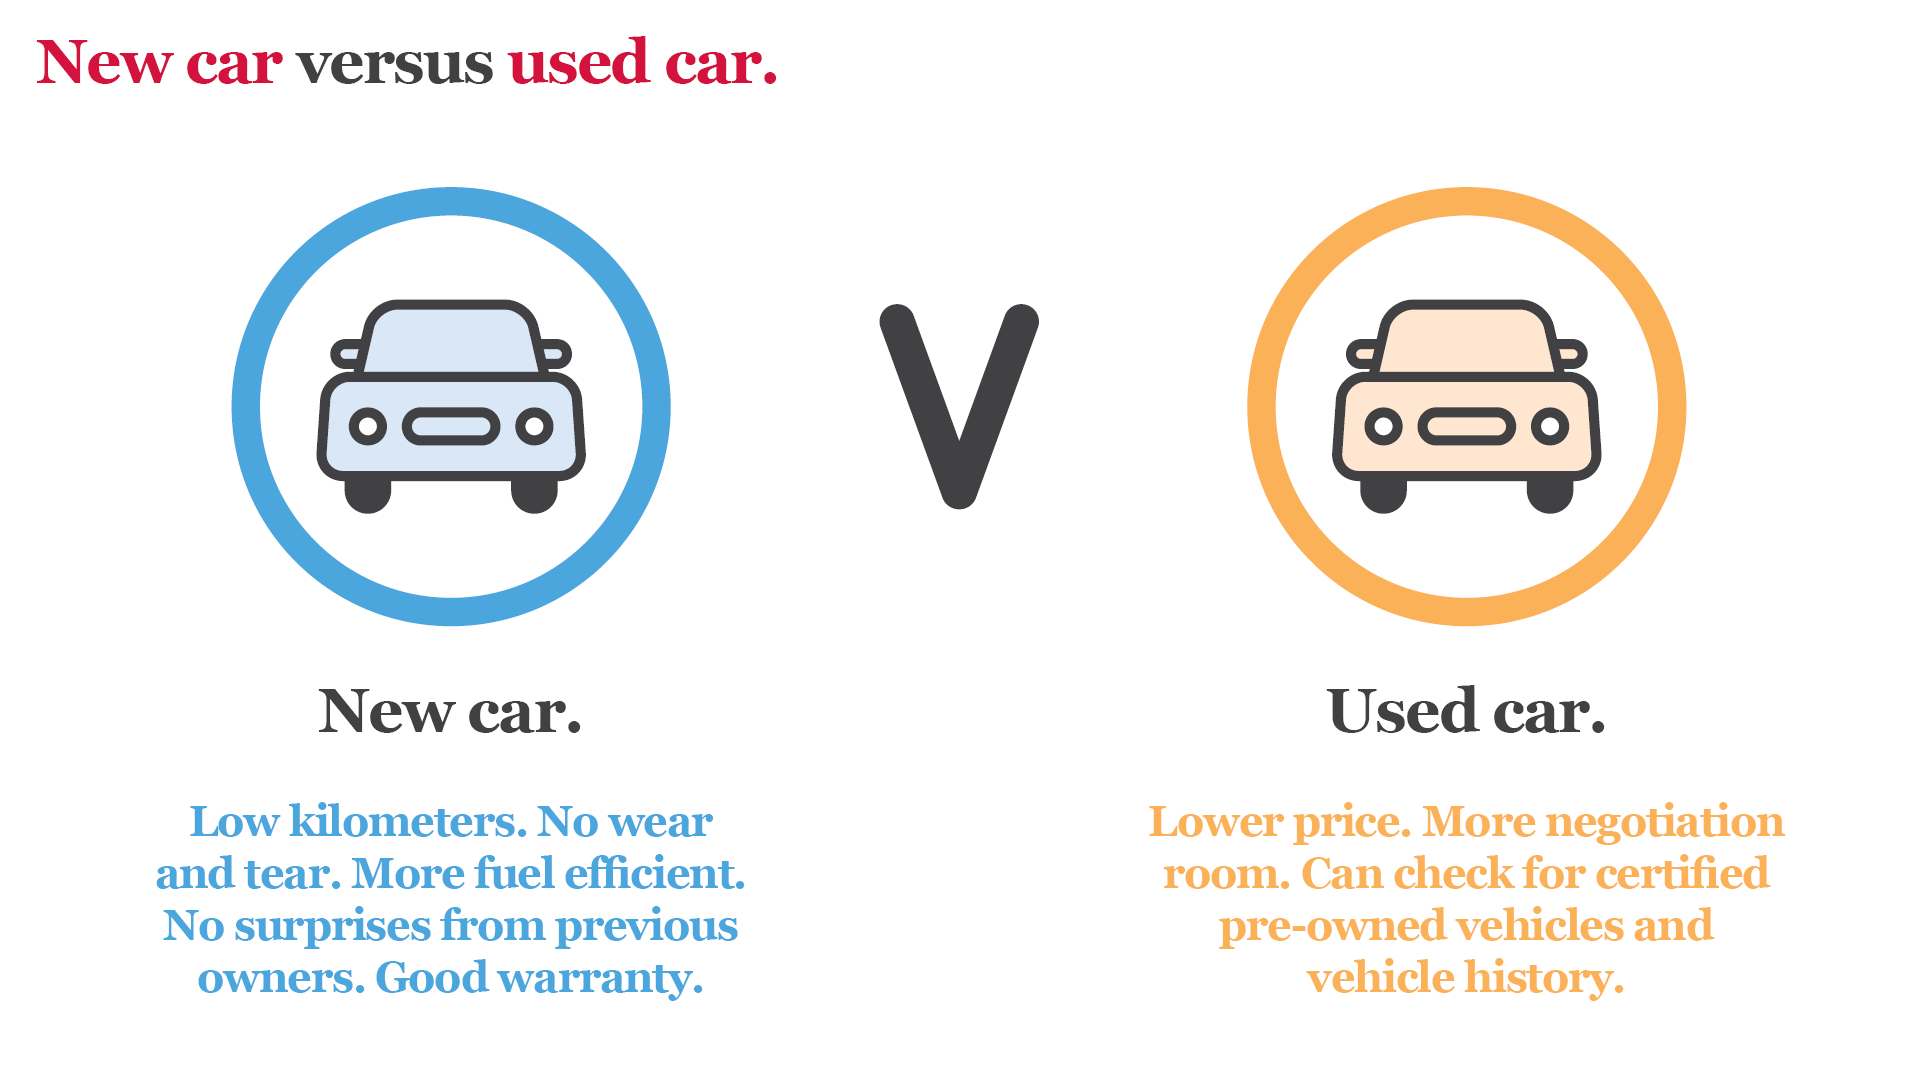 CAM00513_NewCarVersusUsedCar_ArticleInfoGraphic_Jun2021_1920x1080px.png